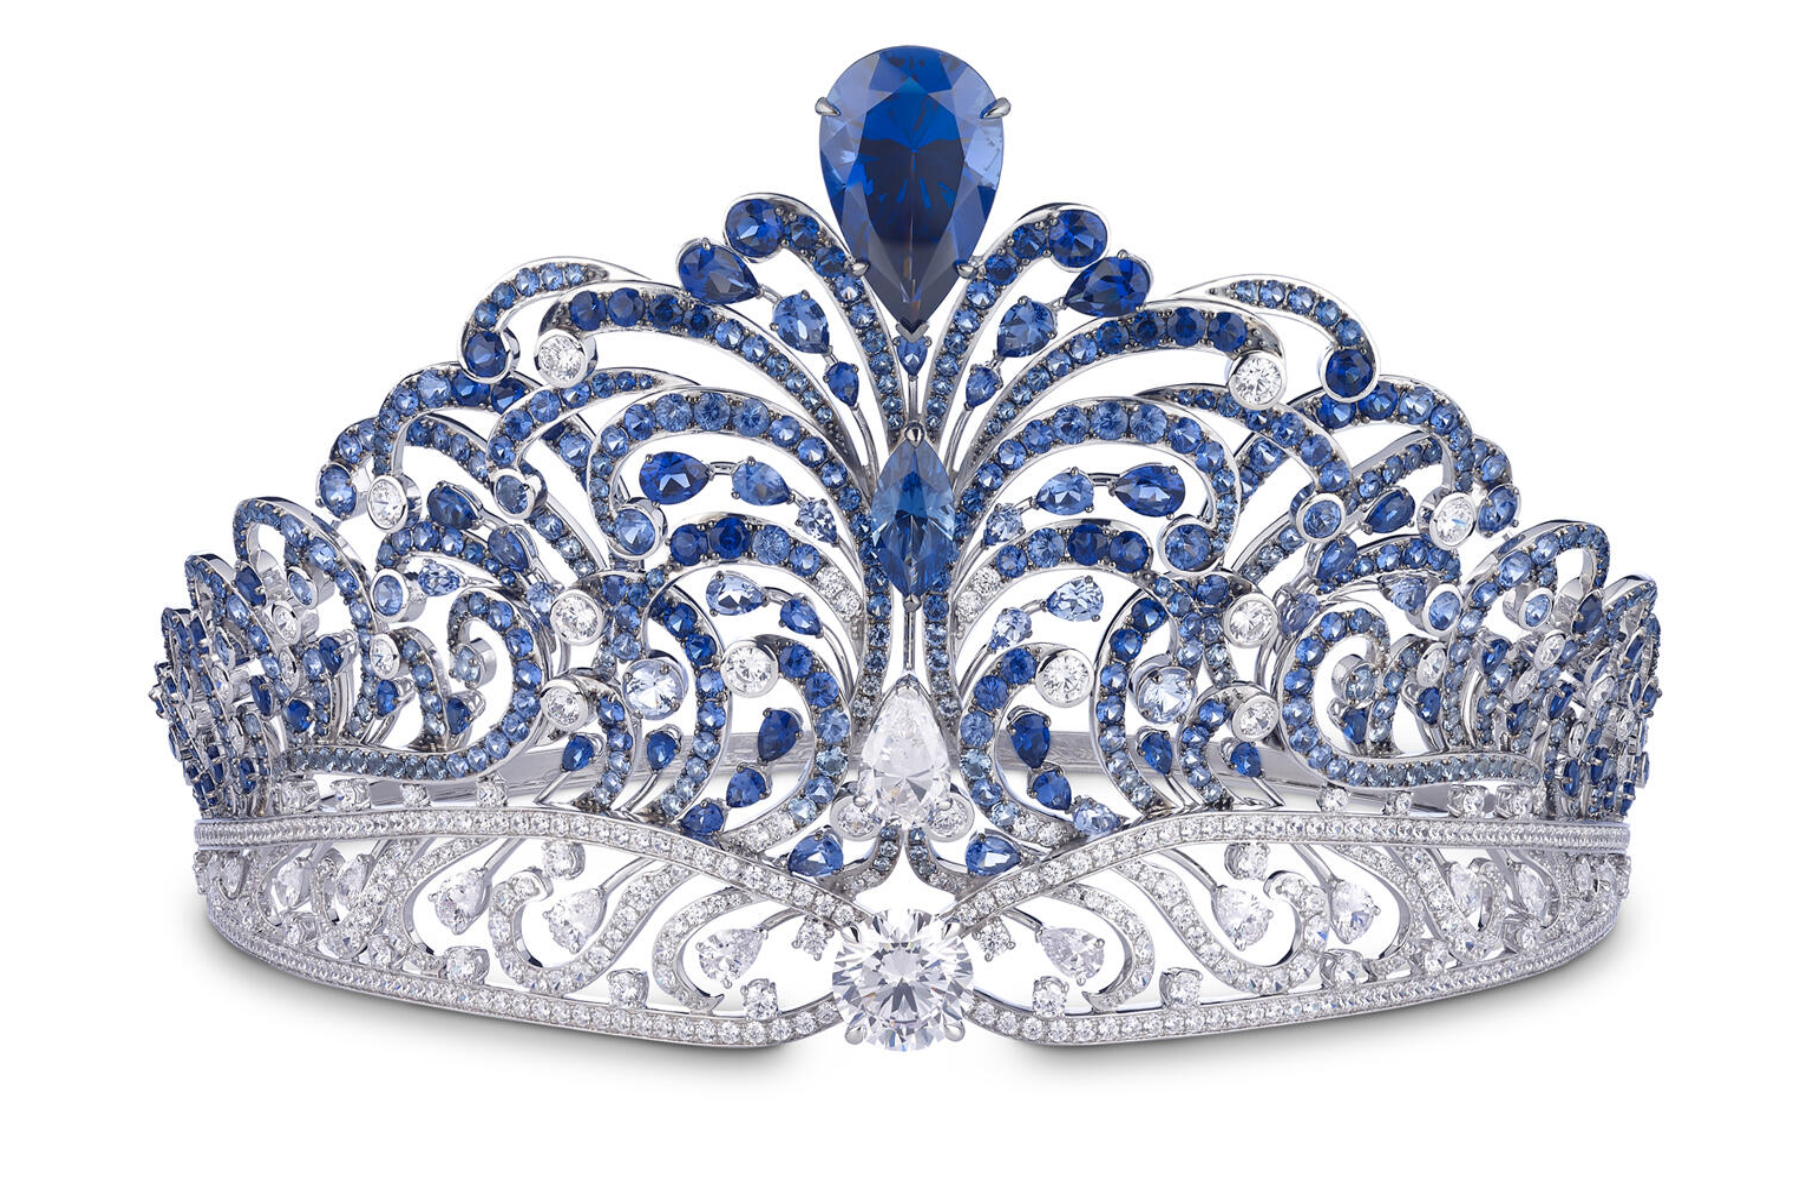 Mouawad’s new Miss Universe crown